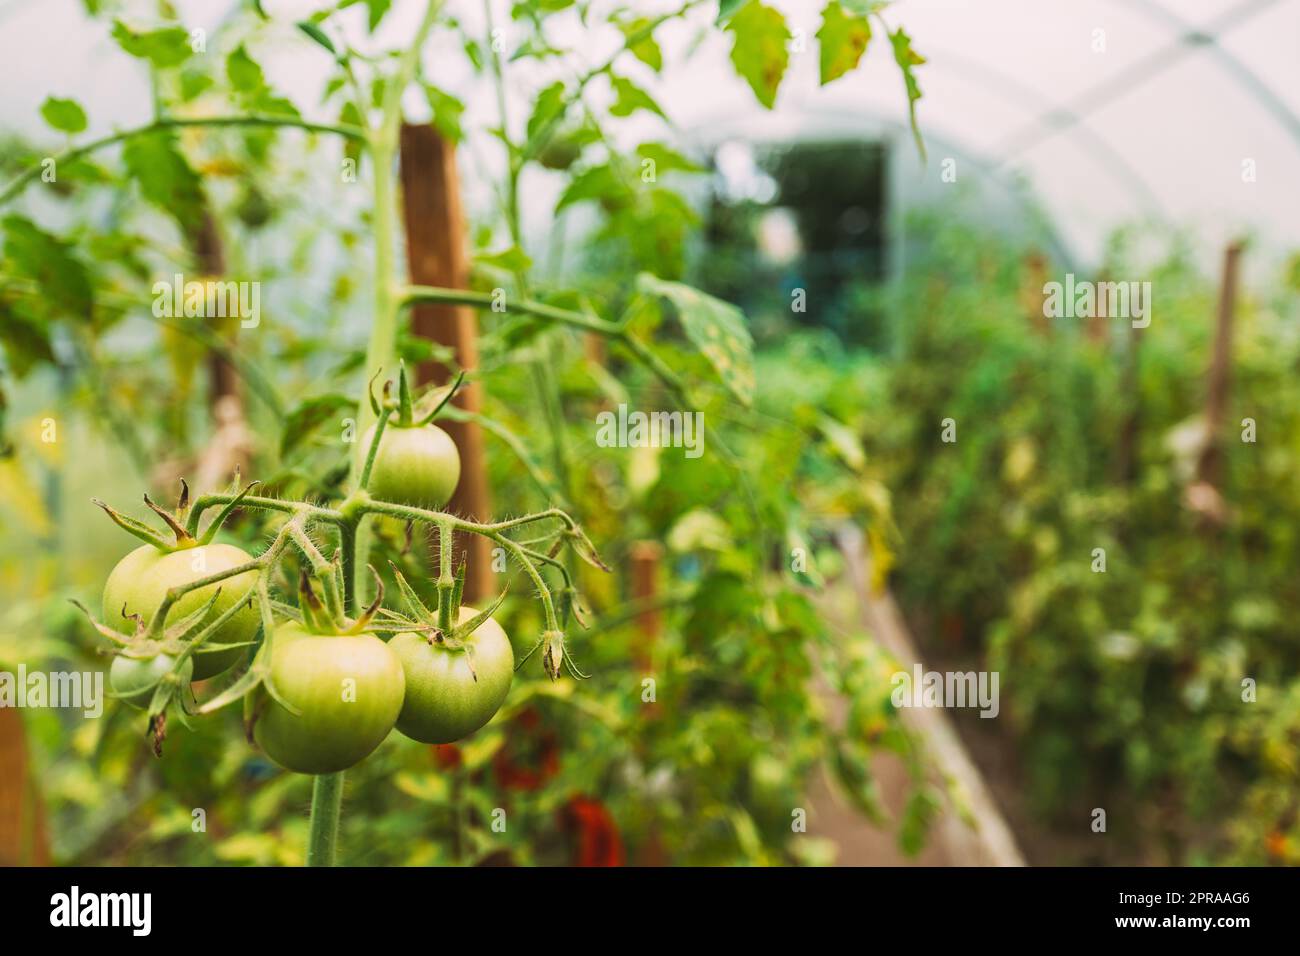 Tomatoes Vegetables Growing In Raised Beds In Vegetable Garden Or Hothouse Or Greenhouse Stock Photo